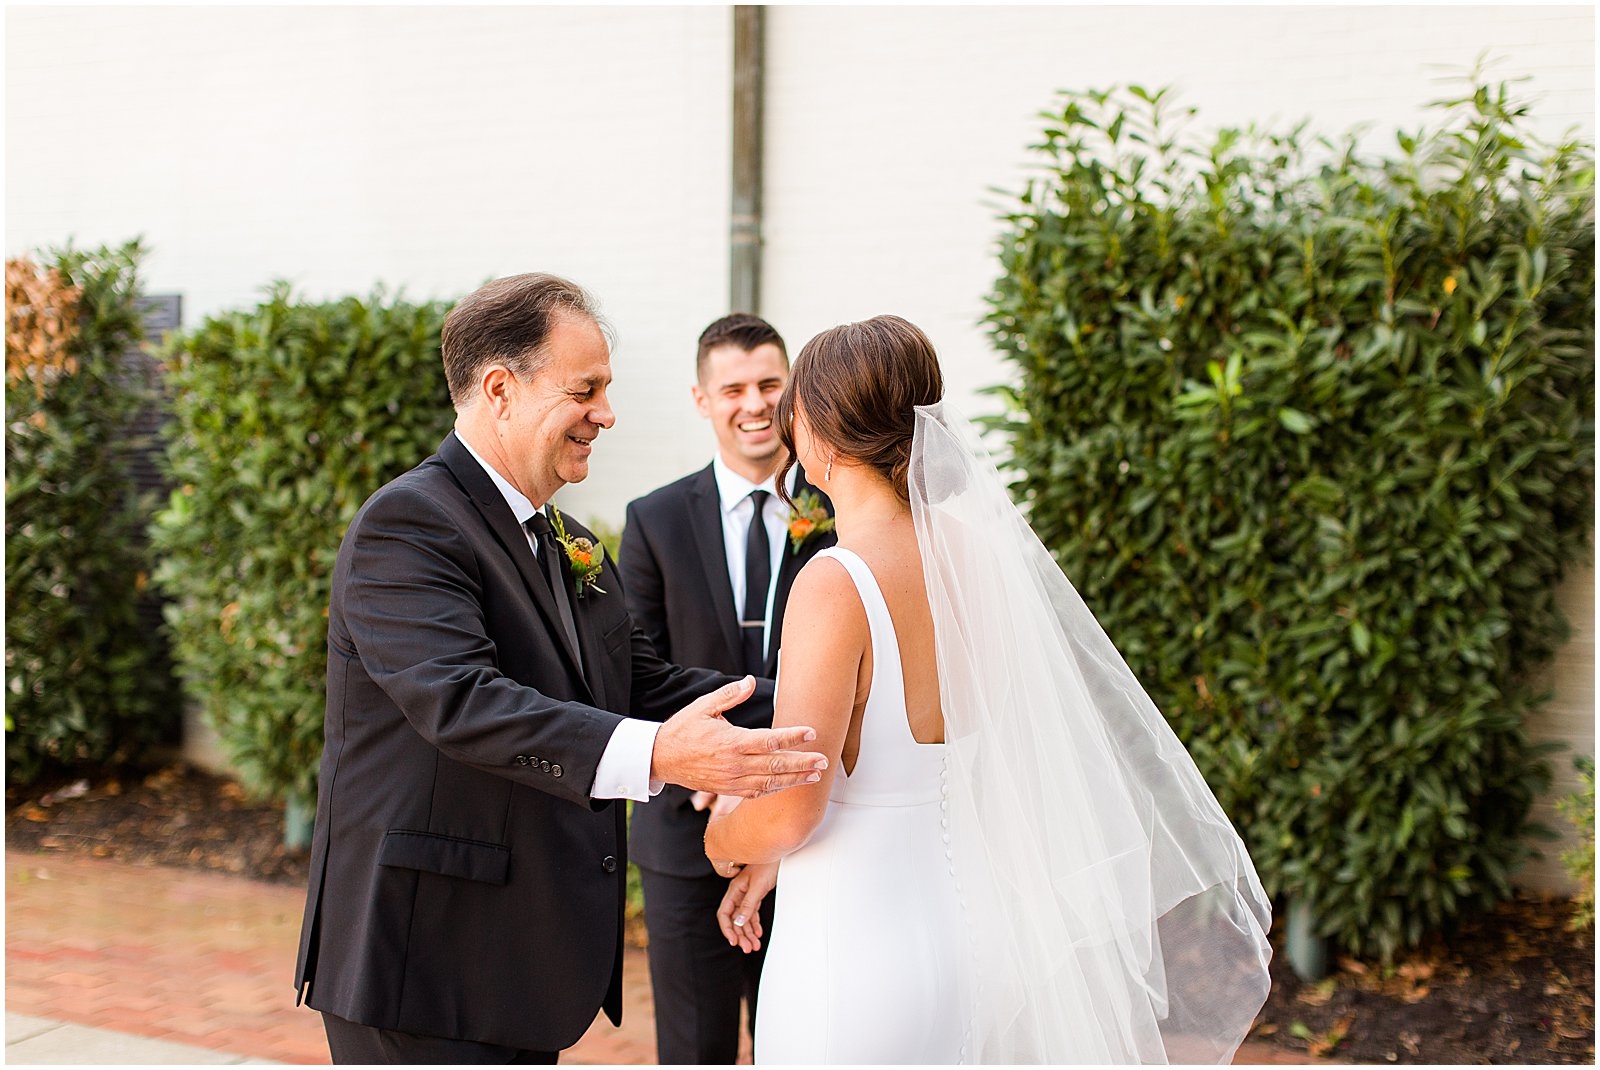 A Fall Wedding at Evansville Country Club | Kaley and Devon | Bret and Brandie Photography 0033.jpg